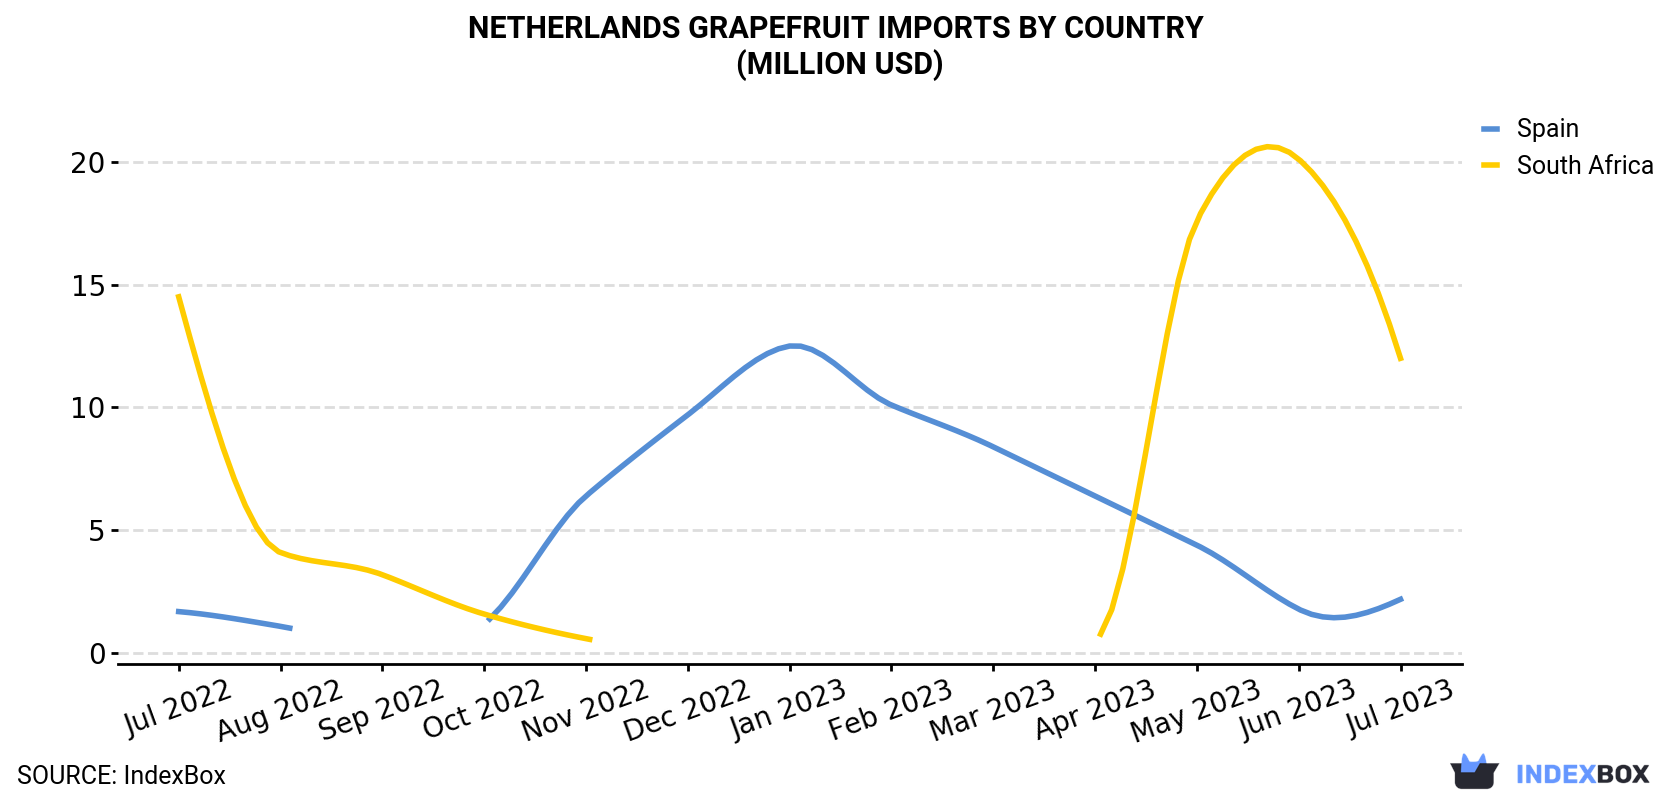 Netherlands Grapefruit Imports By Country (Million USD)